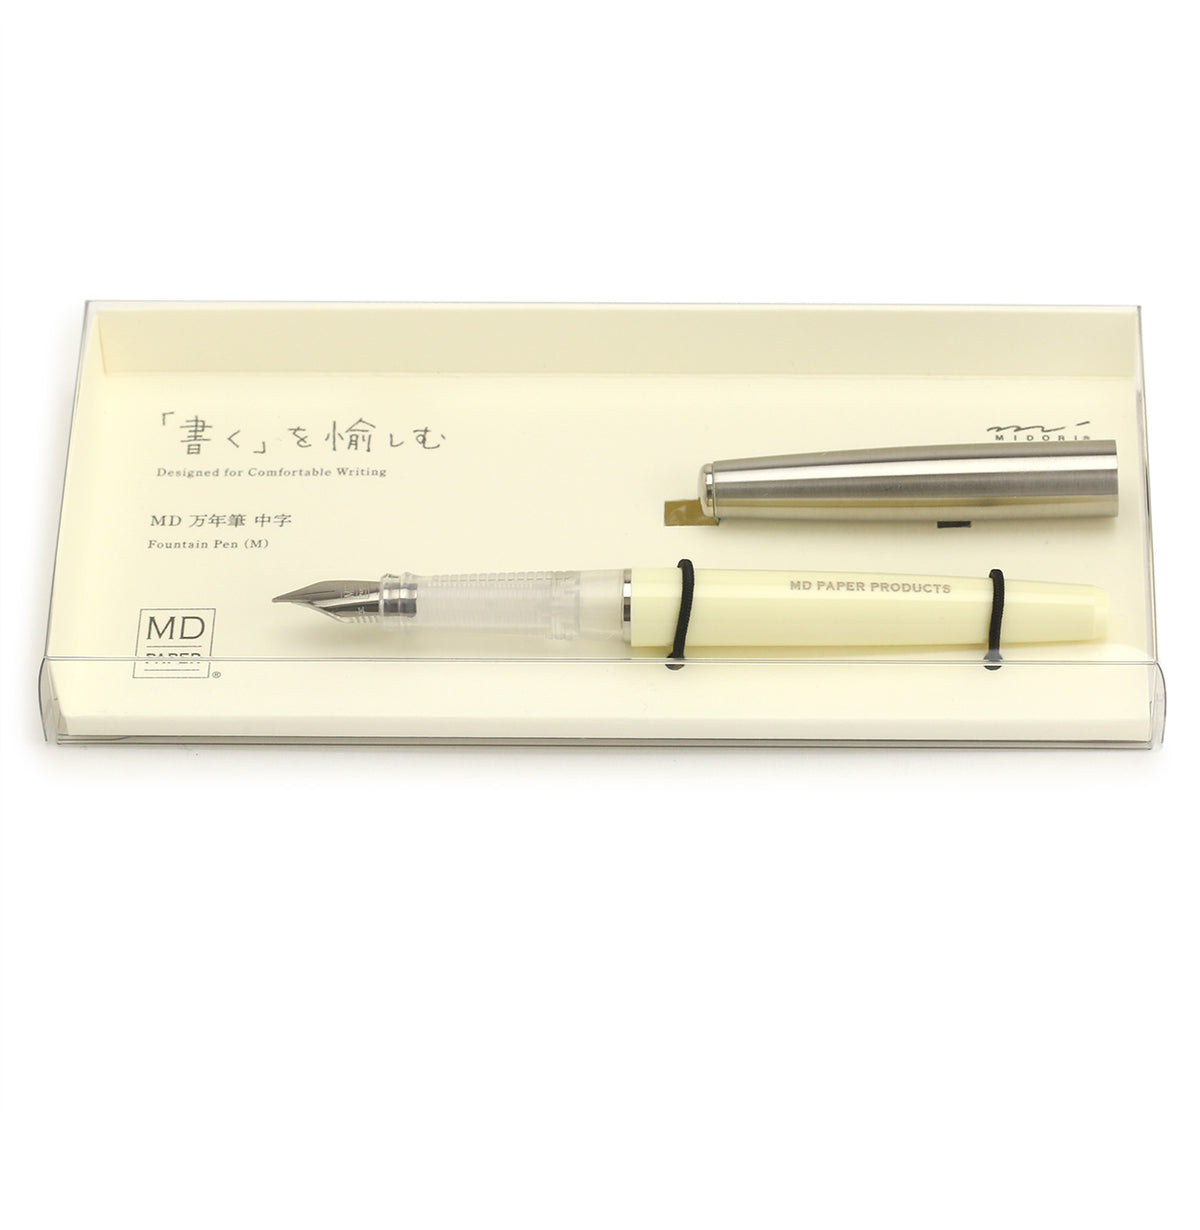 Packaged MD fountain pen with clear box, designed for comfortable writing